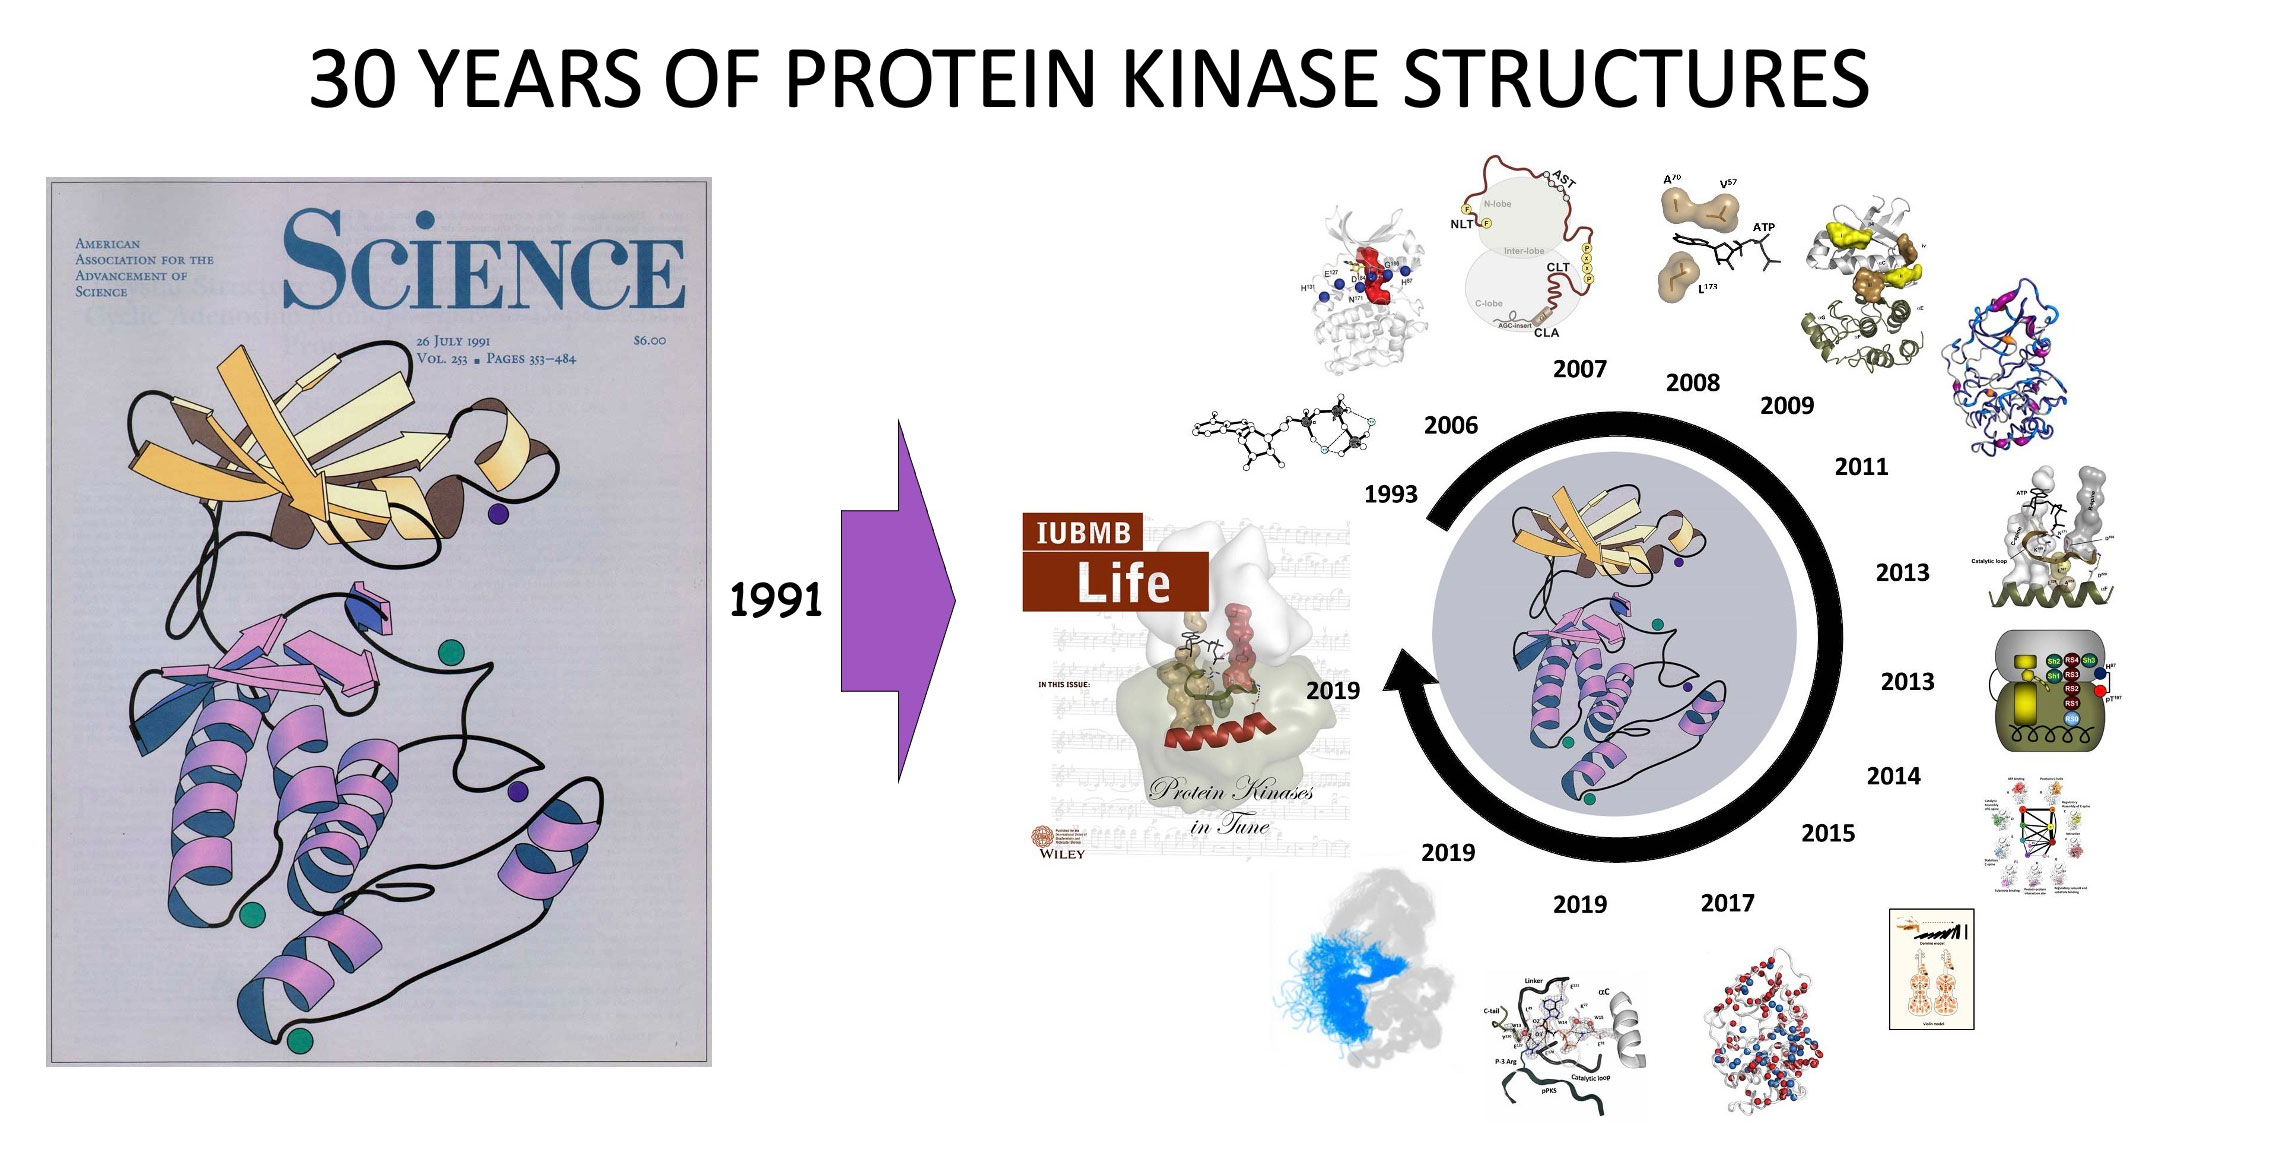 3 of 3, 30 Years of Protein Kinase Structures